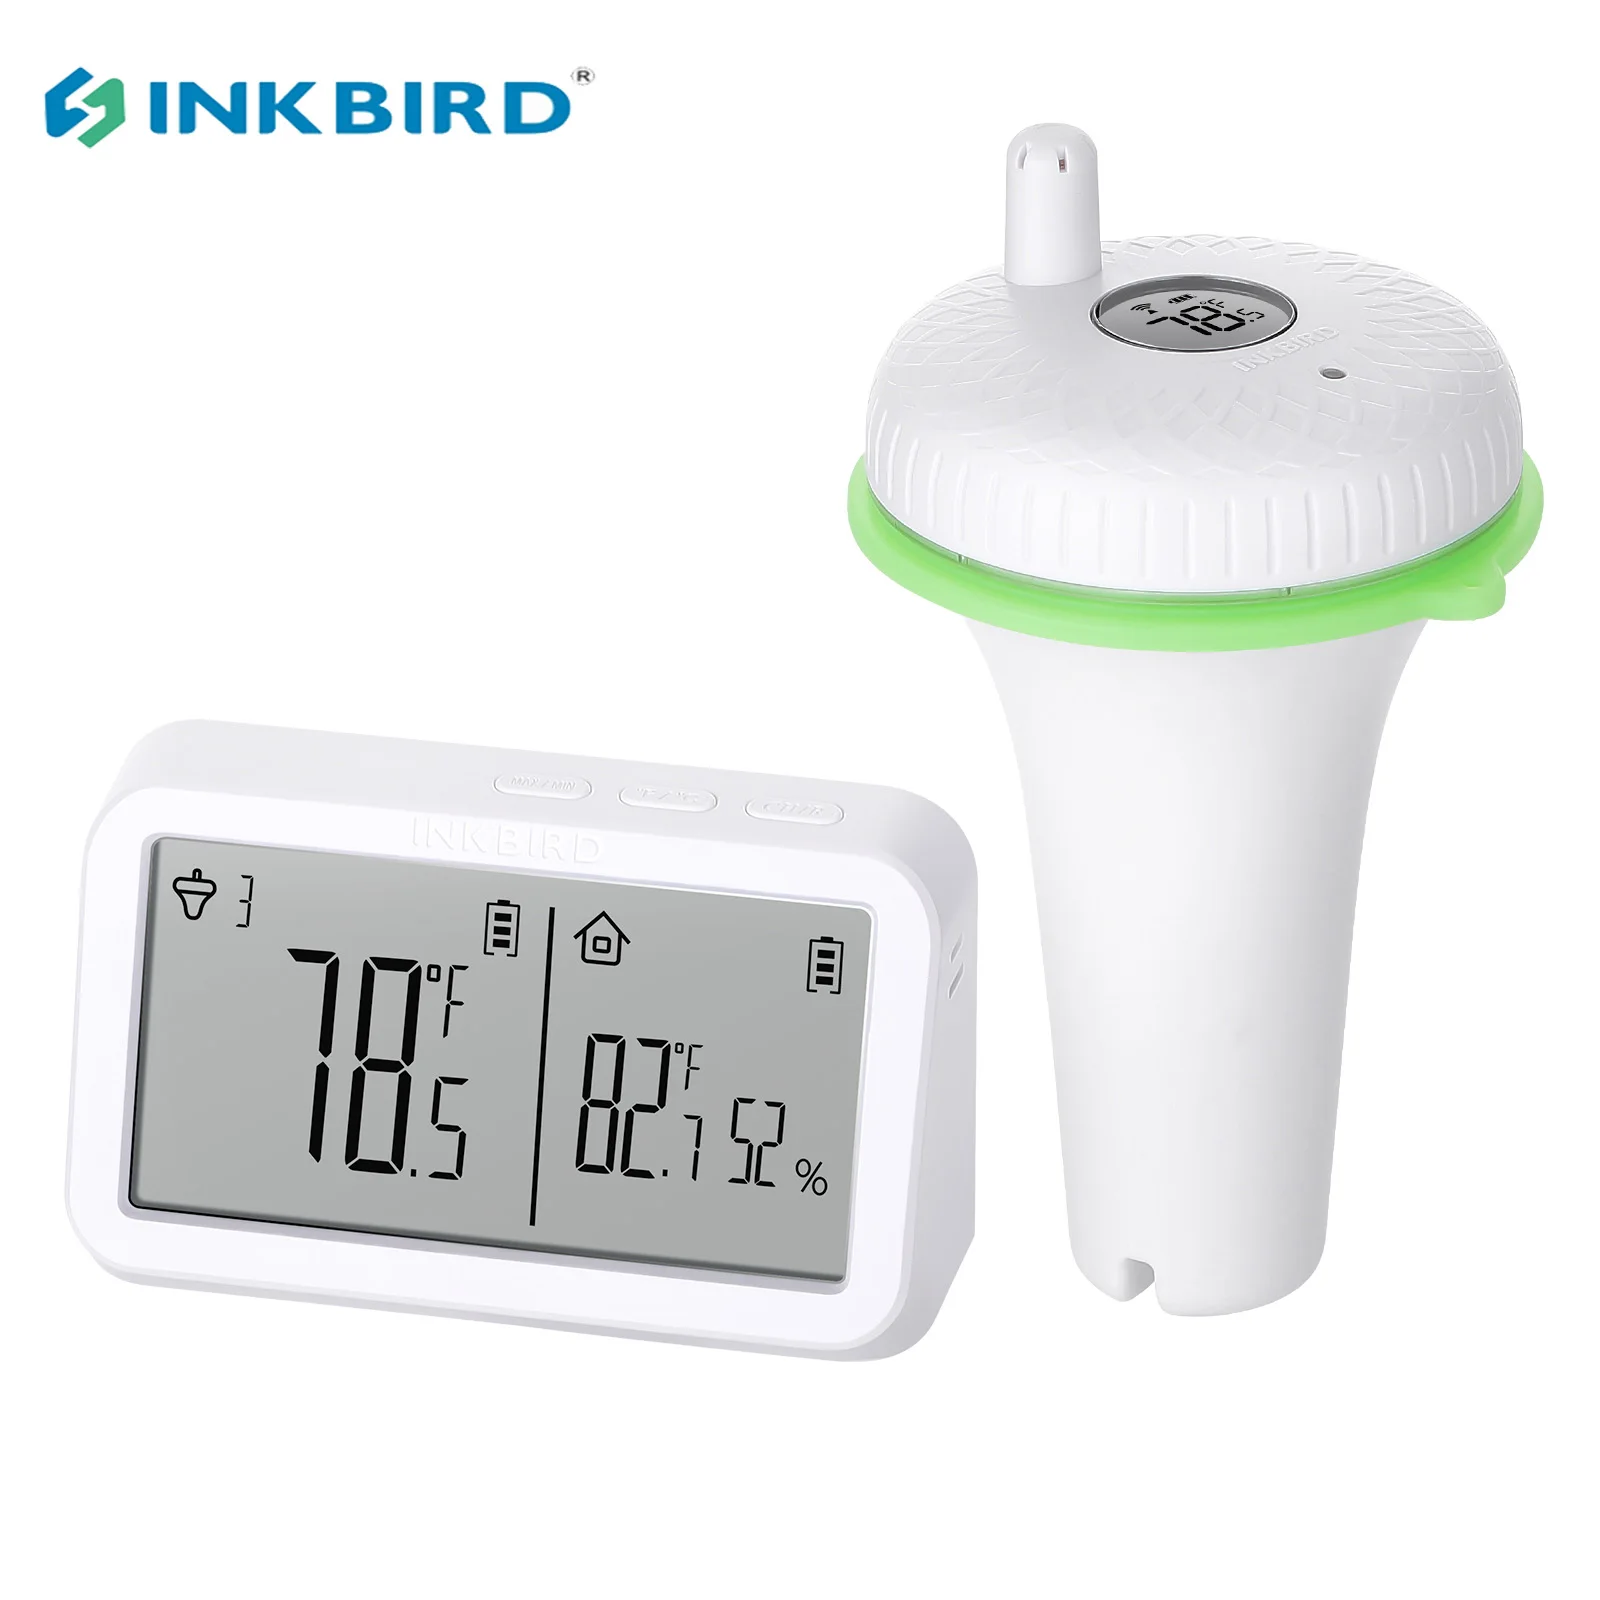 INKBIRD 2nd-Gen Wireless Floating Pool Thermometer Waterproof Temperature Humidity Monitor 3 Channels For Swimming Pool Hot Tubs